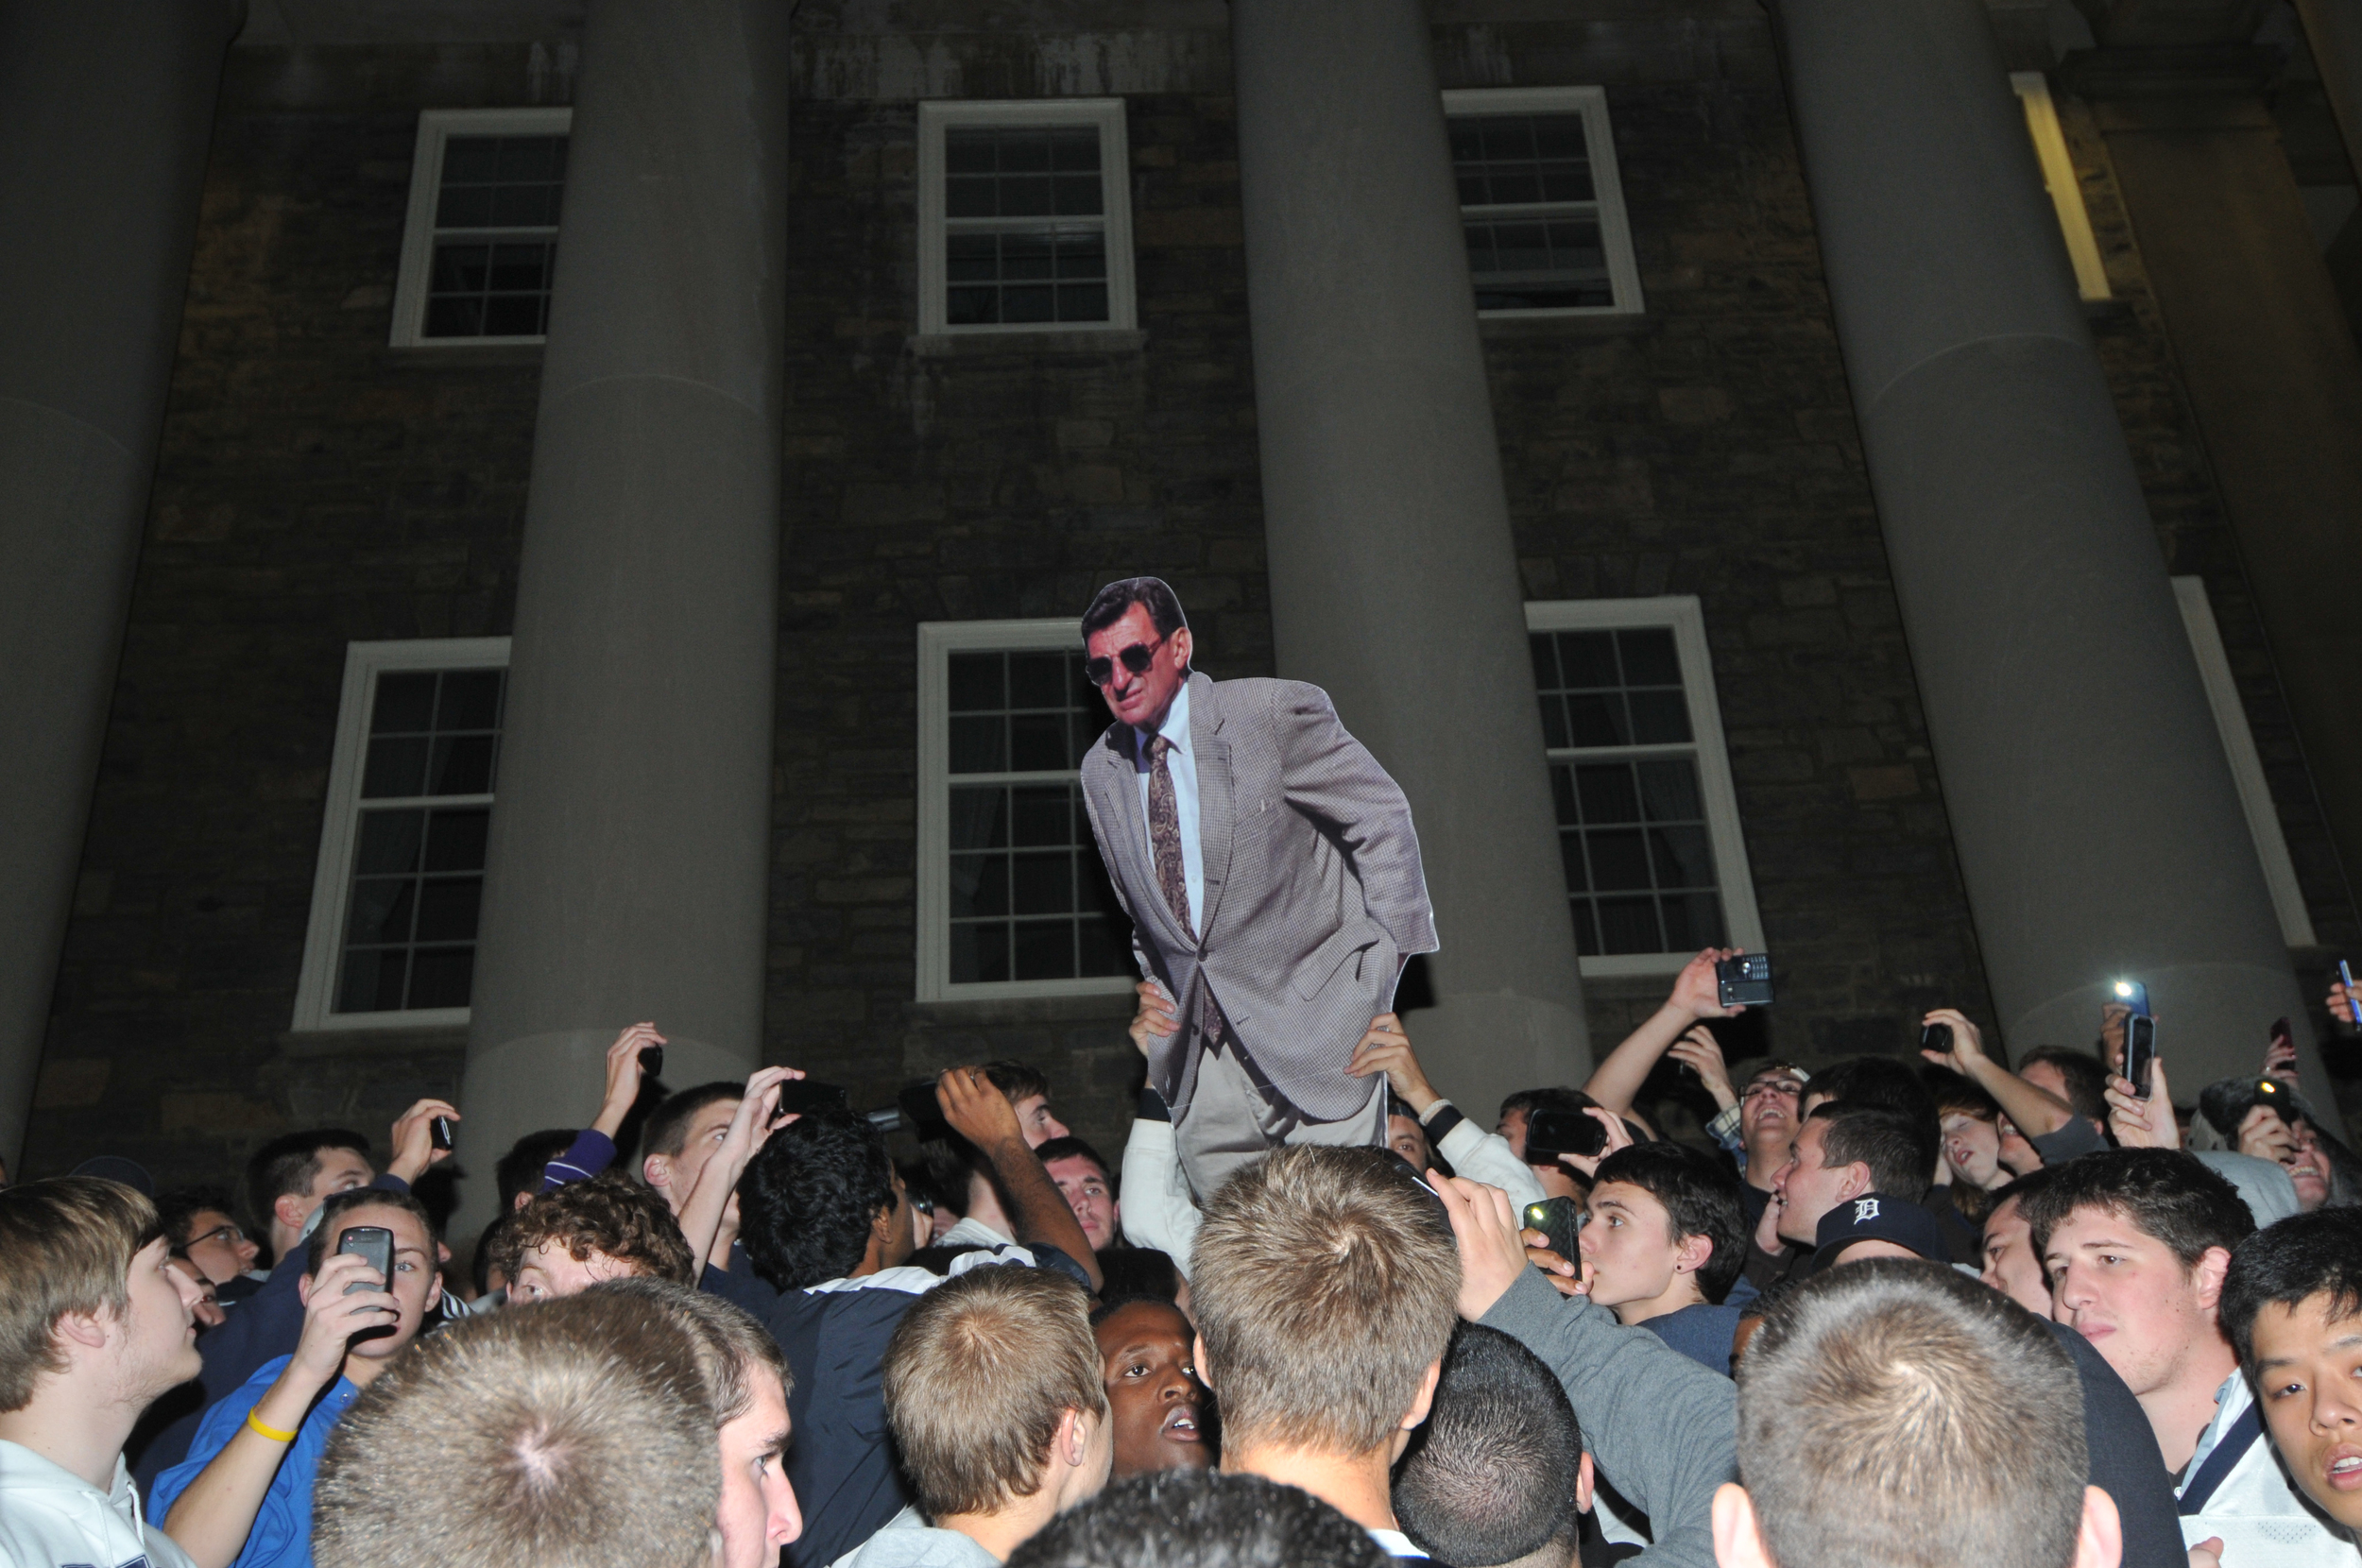  Students riot with a cardboard Joe Paterno on the steps of Old Main on Wednesday night in response to his termination as the head coach of football. 